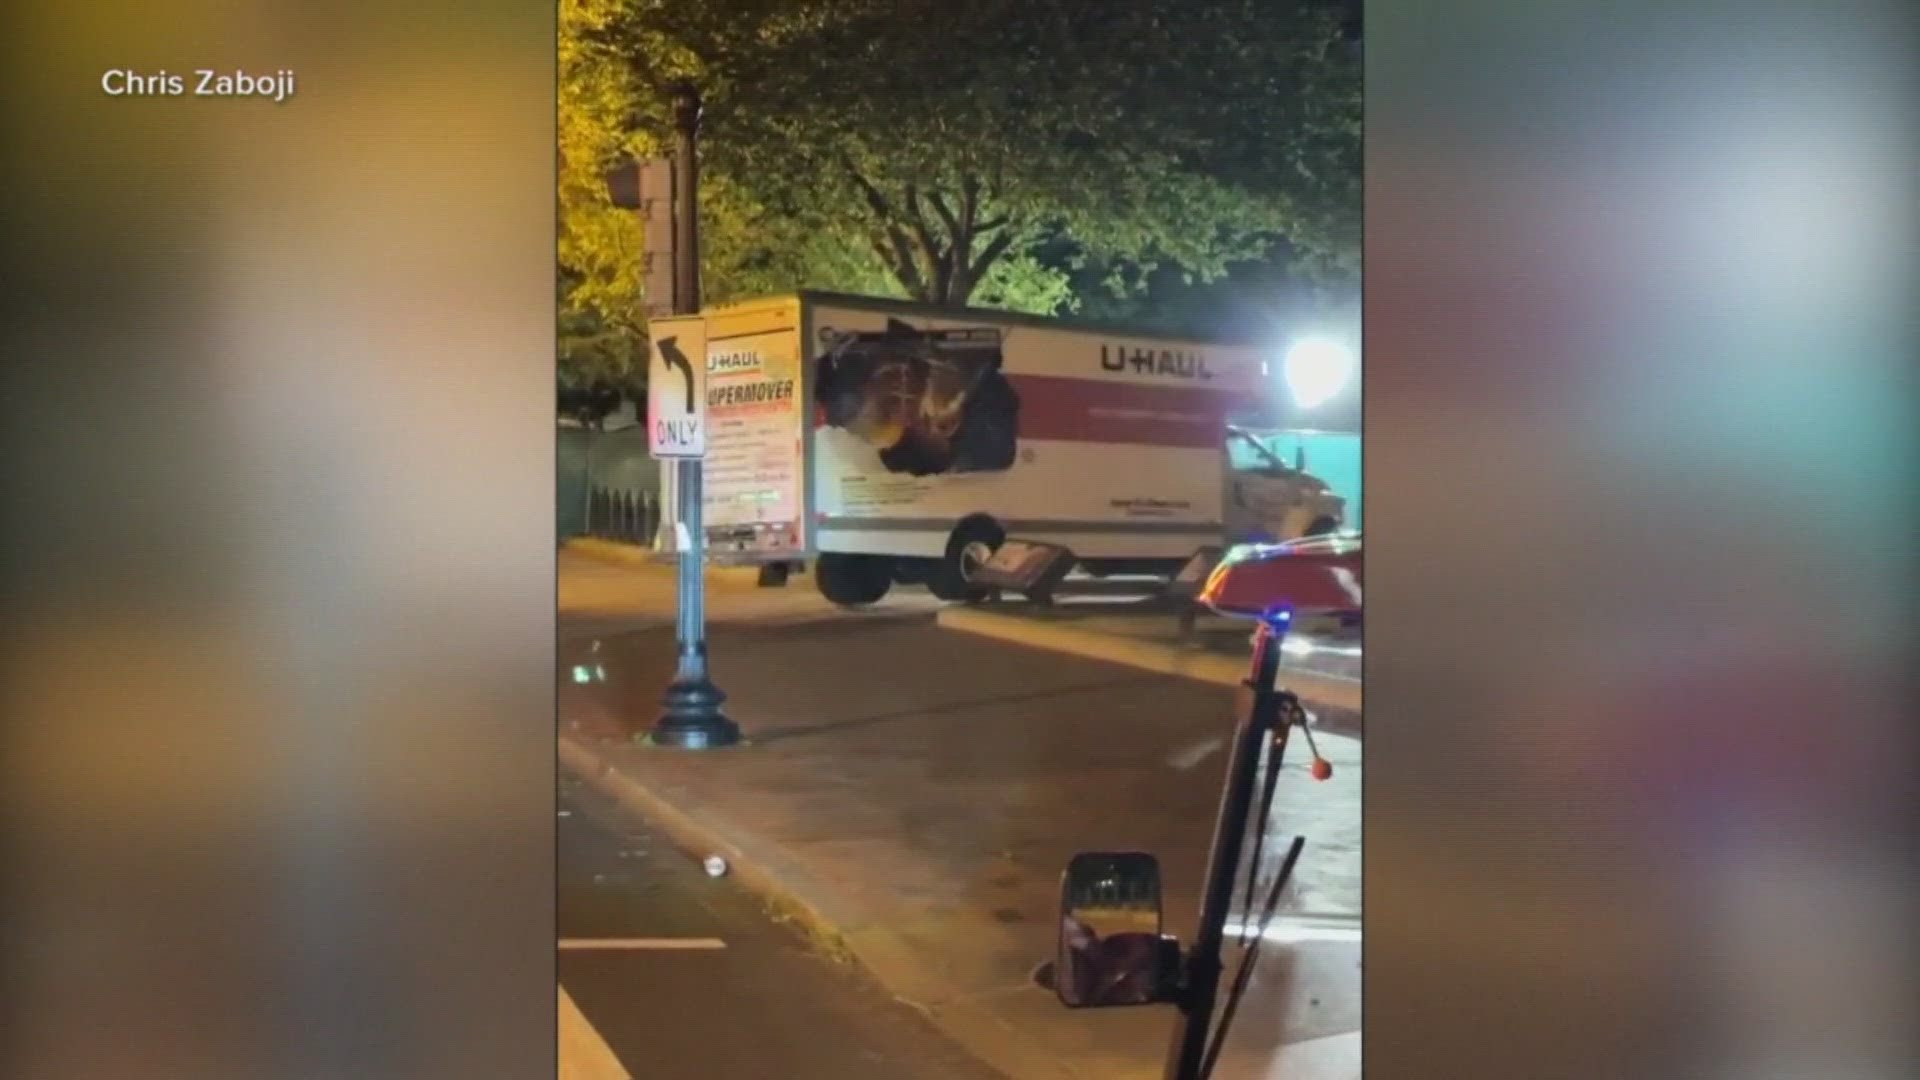 Witnesses saw the box truck speeding down the streets of Washington, D.C. on Monday night.